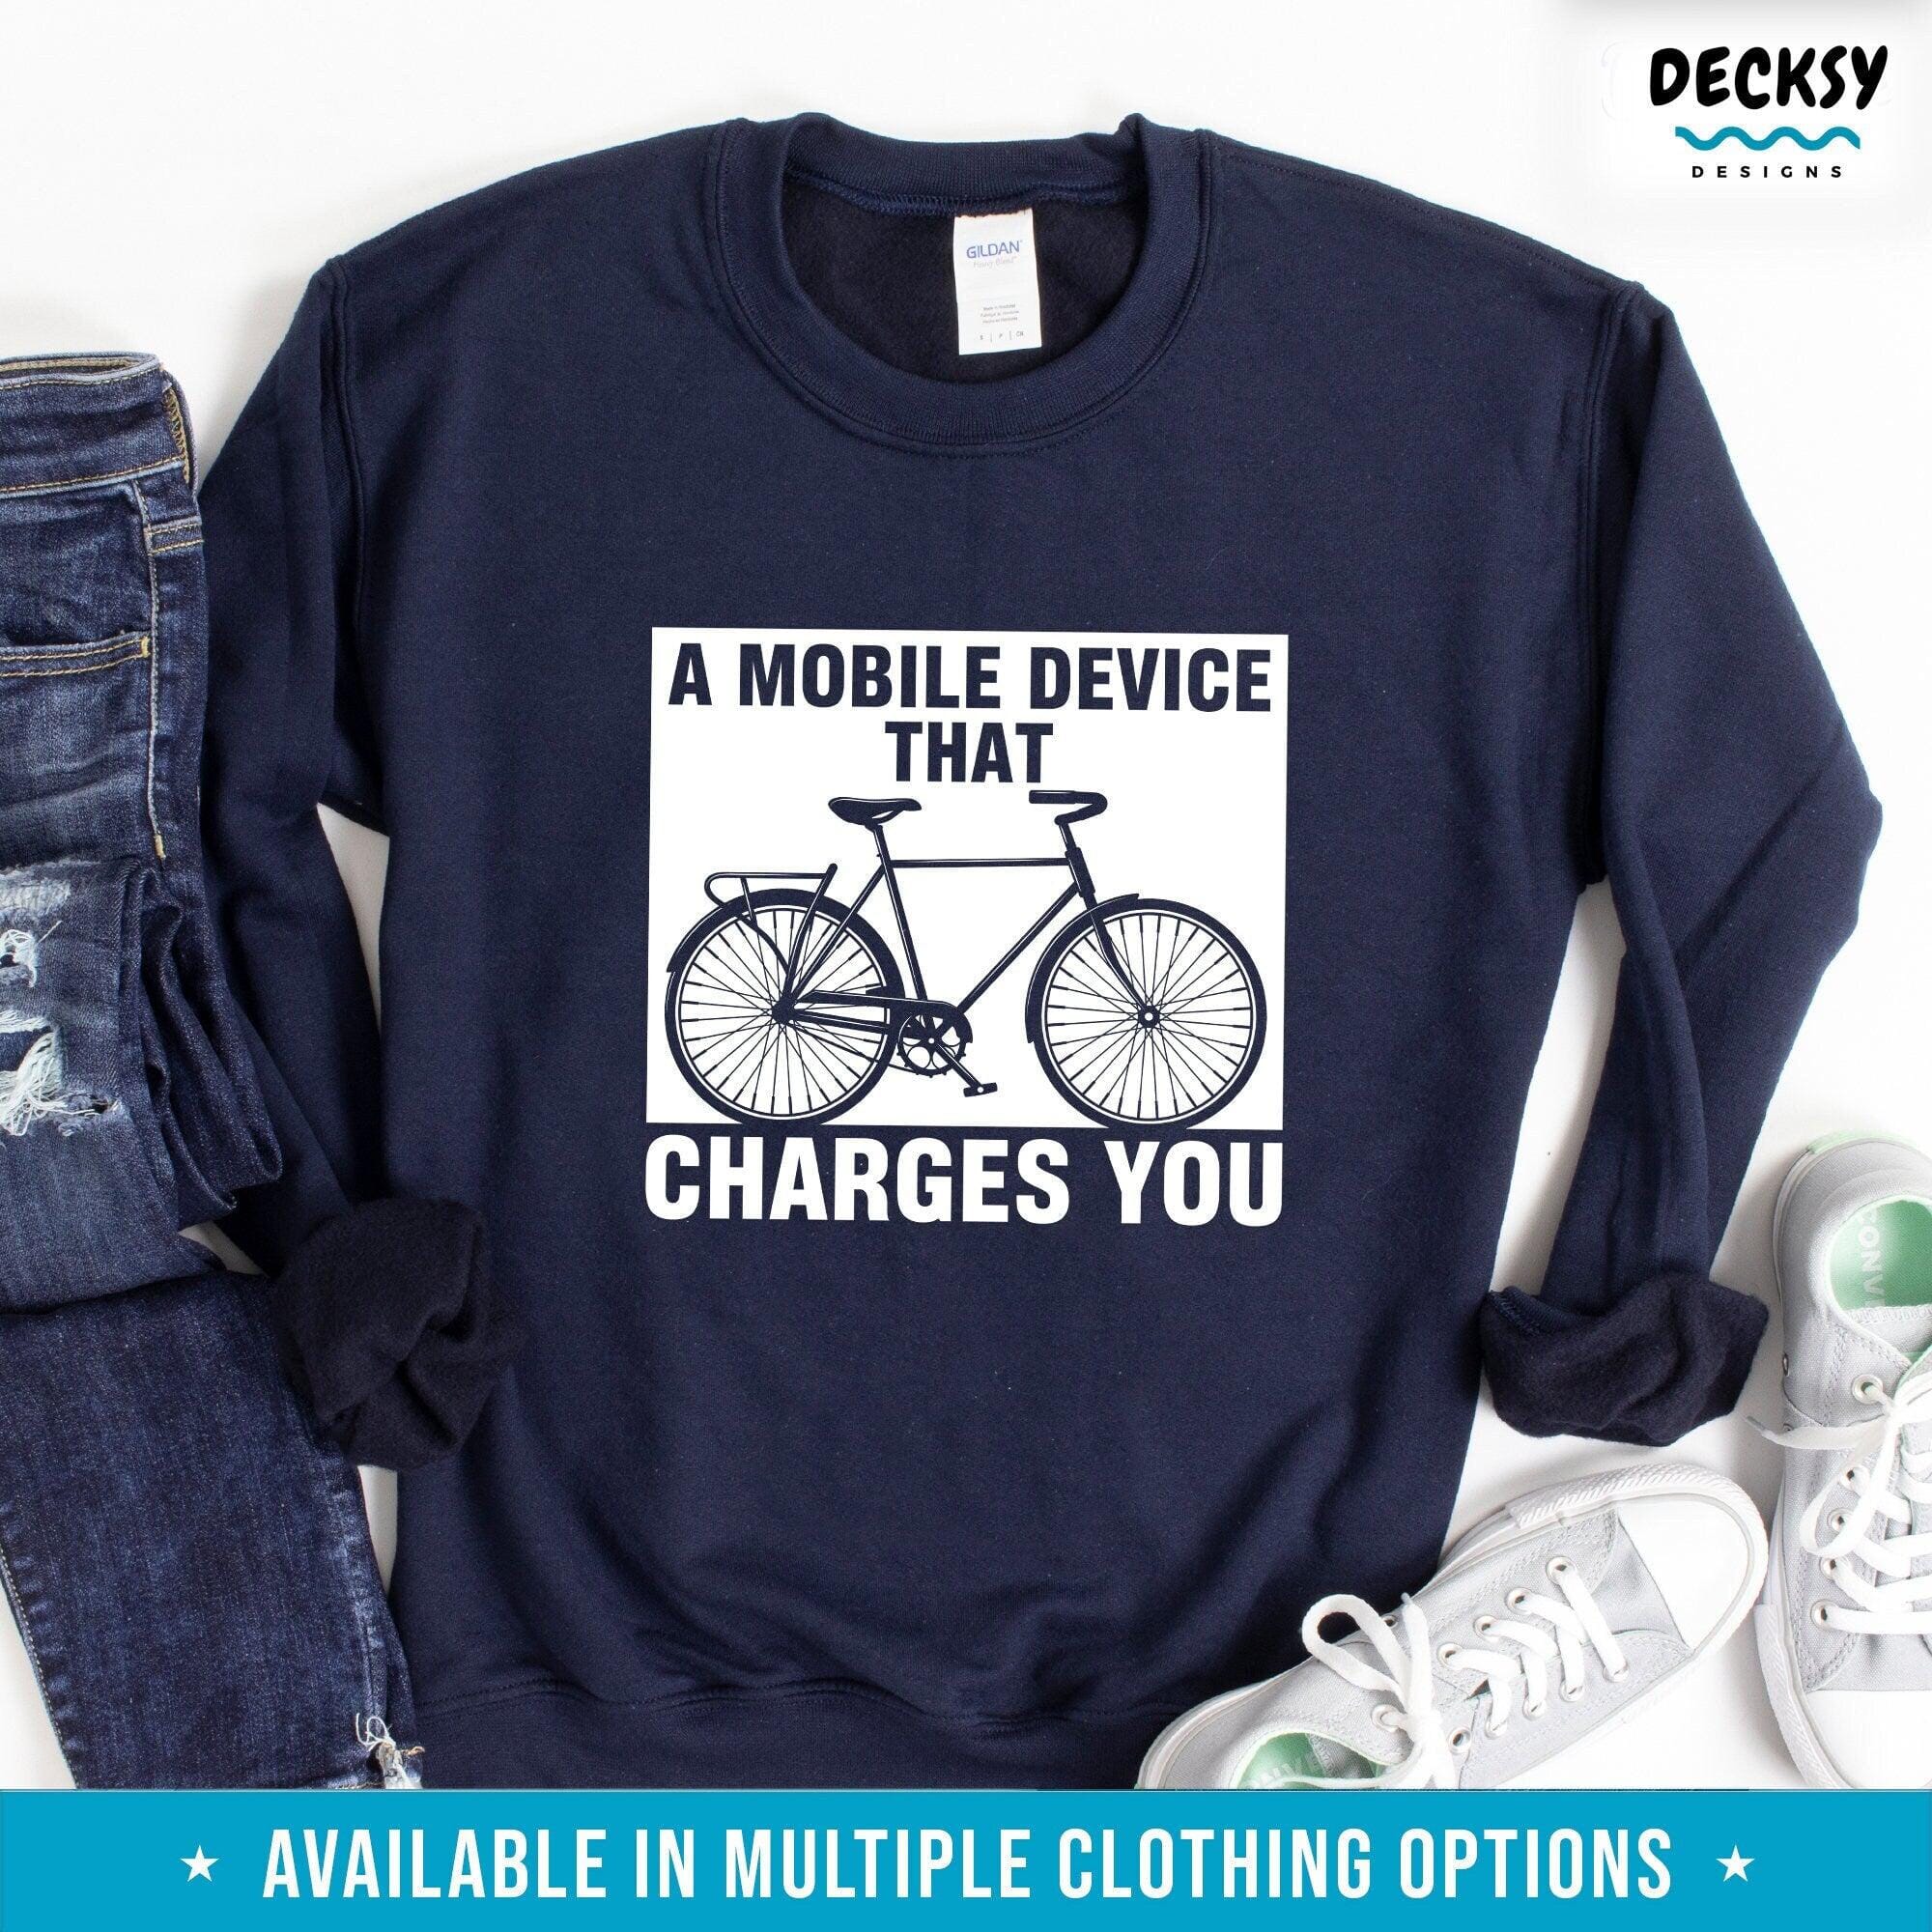 Funny Bike Shirt, Cycling Lover Gift-Clothing:Gender-Neutral Adult Clothing:Tops & Tees:T-shirts:Graphic Tees-DecksyDesigns